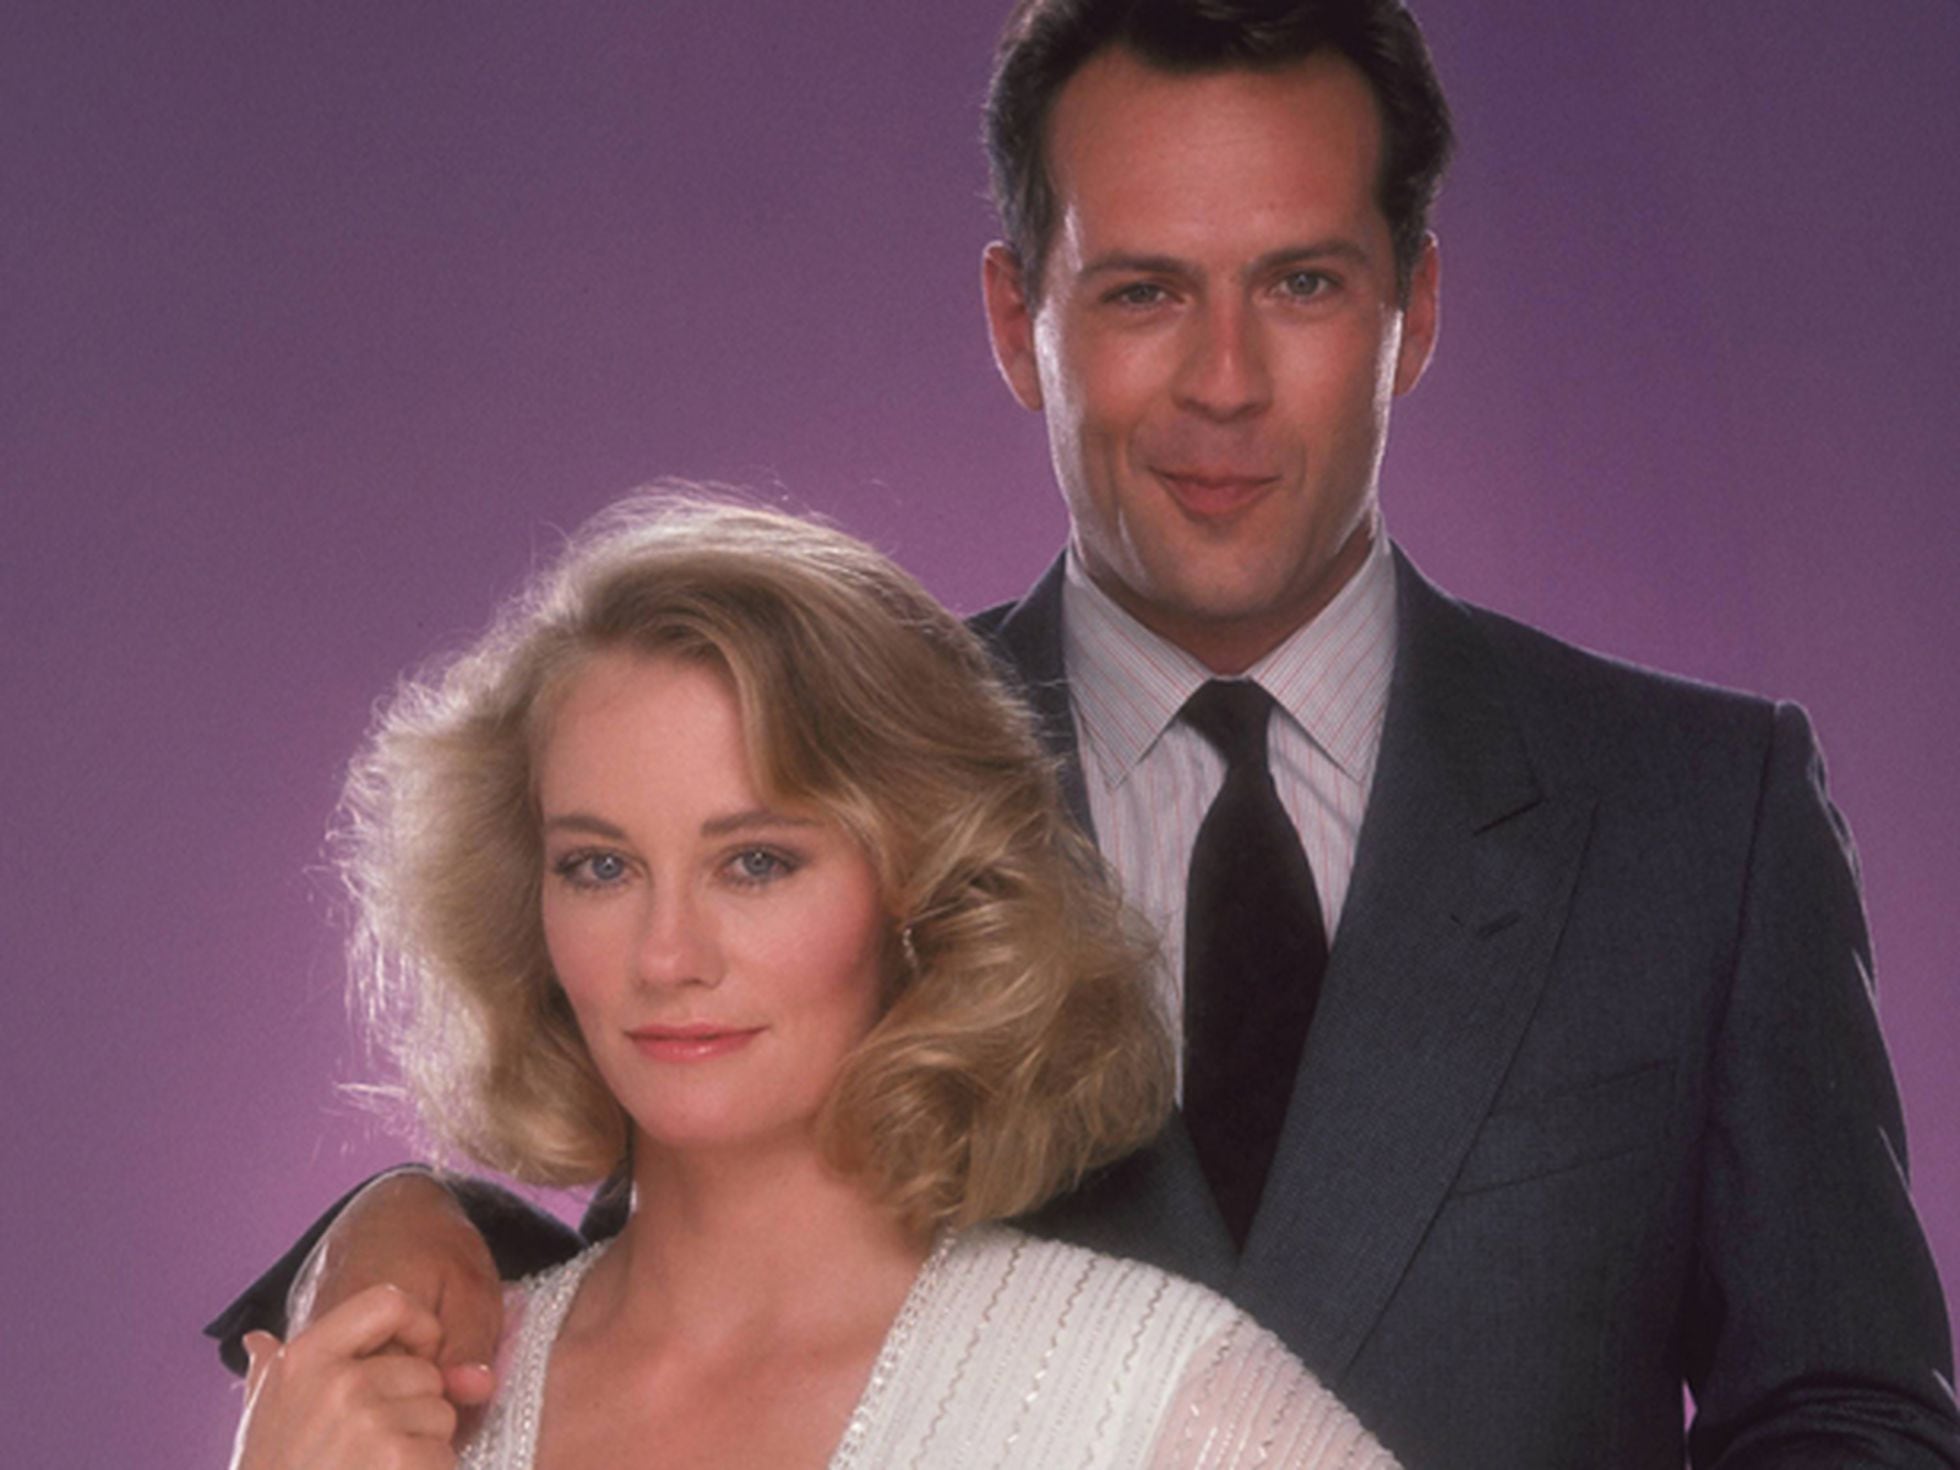 Moonlighting,' the series that launched Bruce Willis on Cybill Shepherd's hunch | Culture | EL PAÍS English